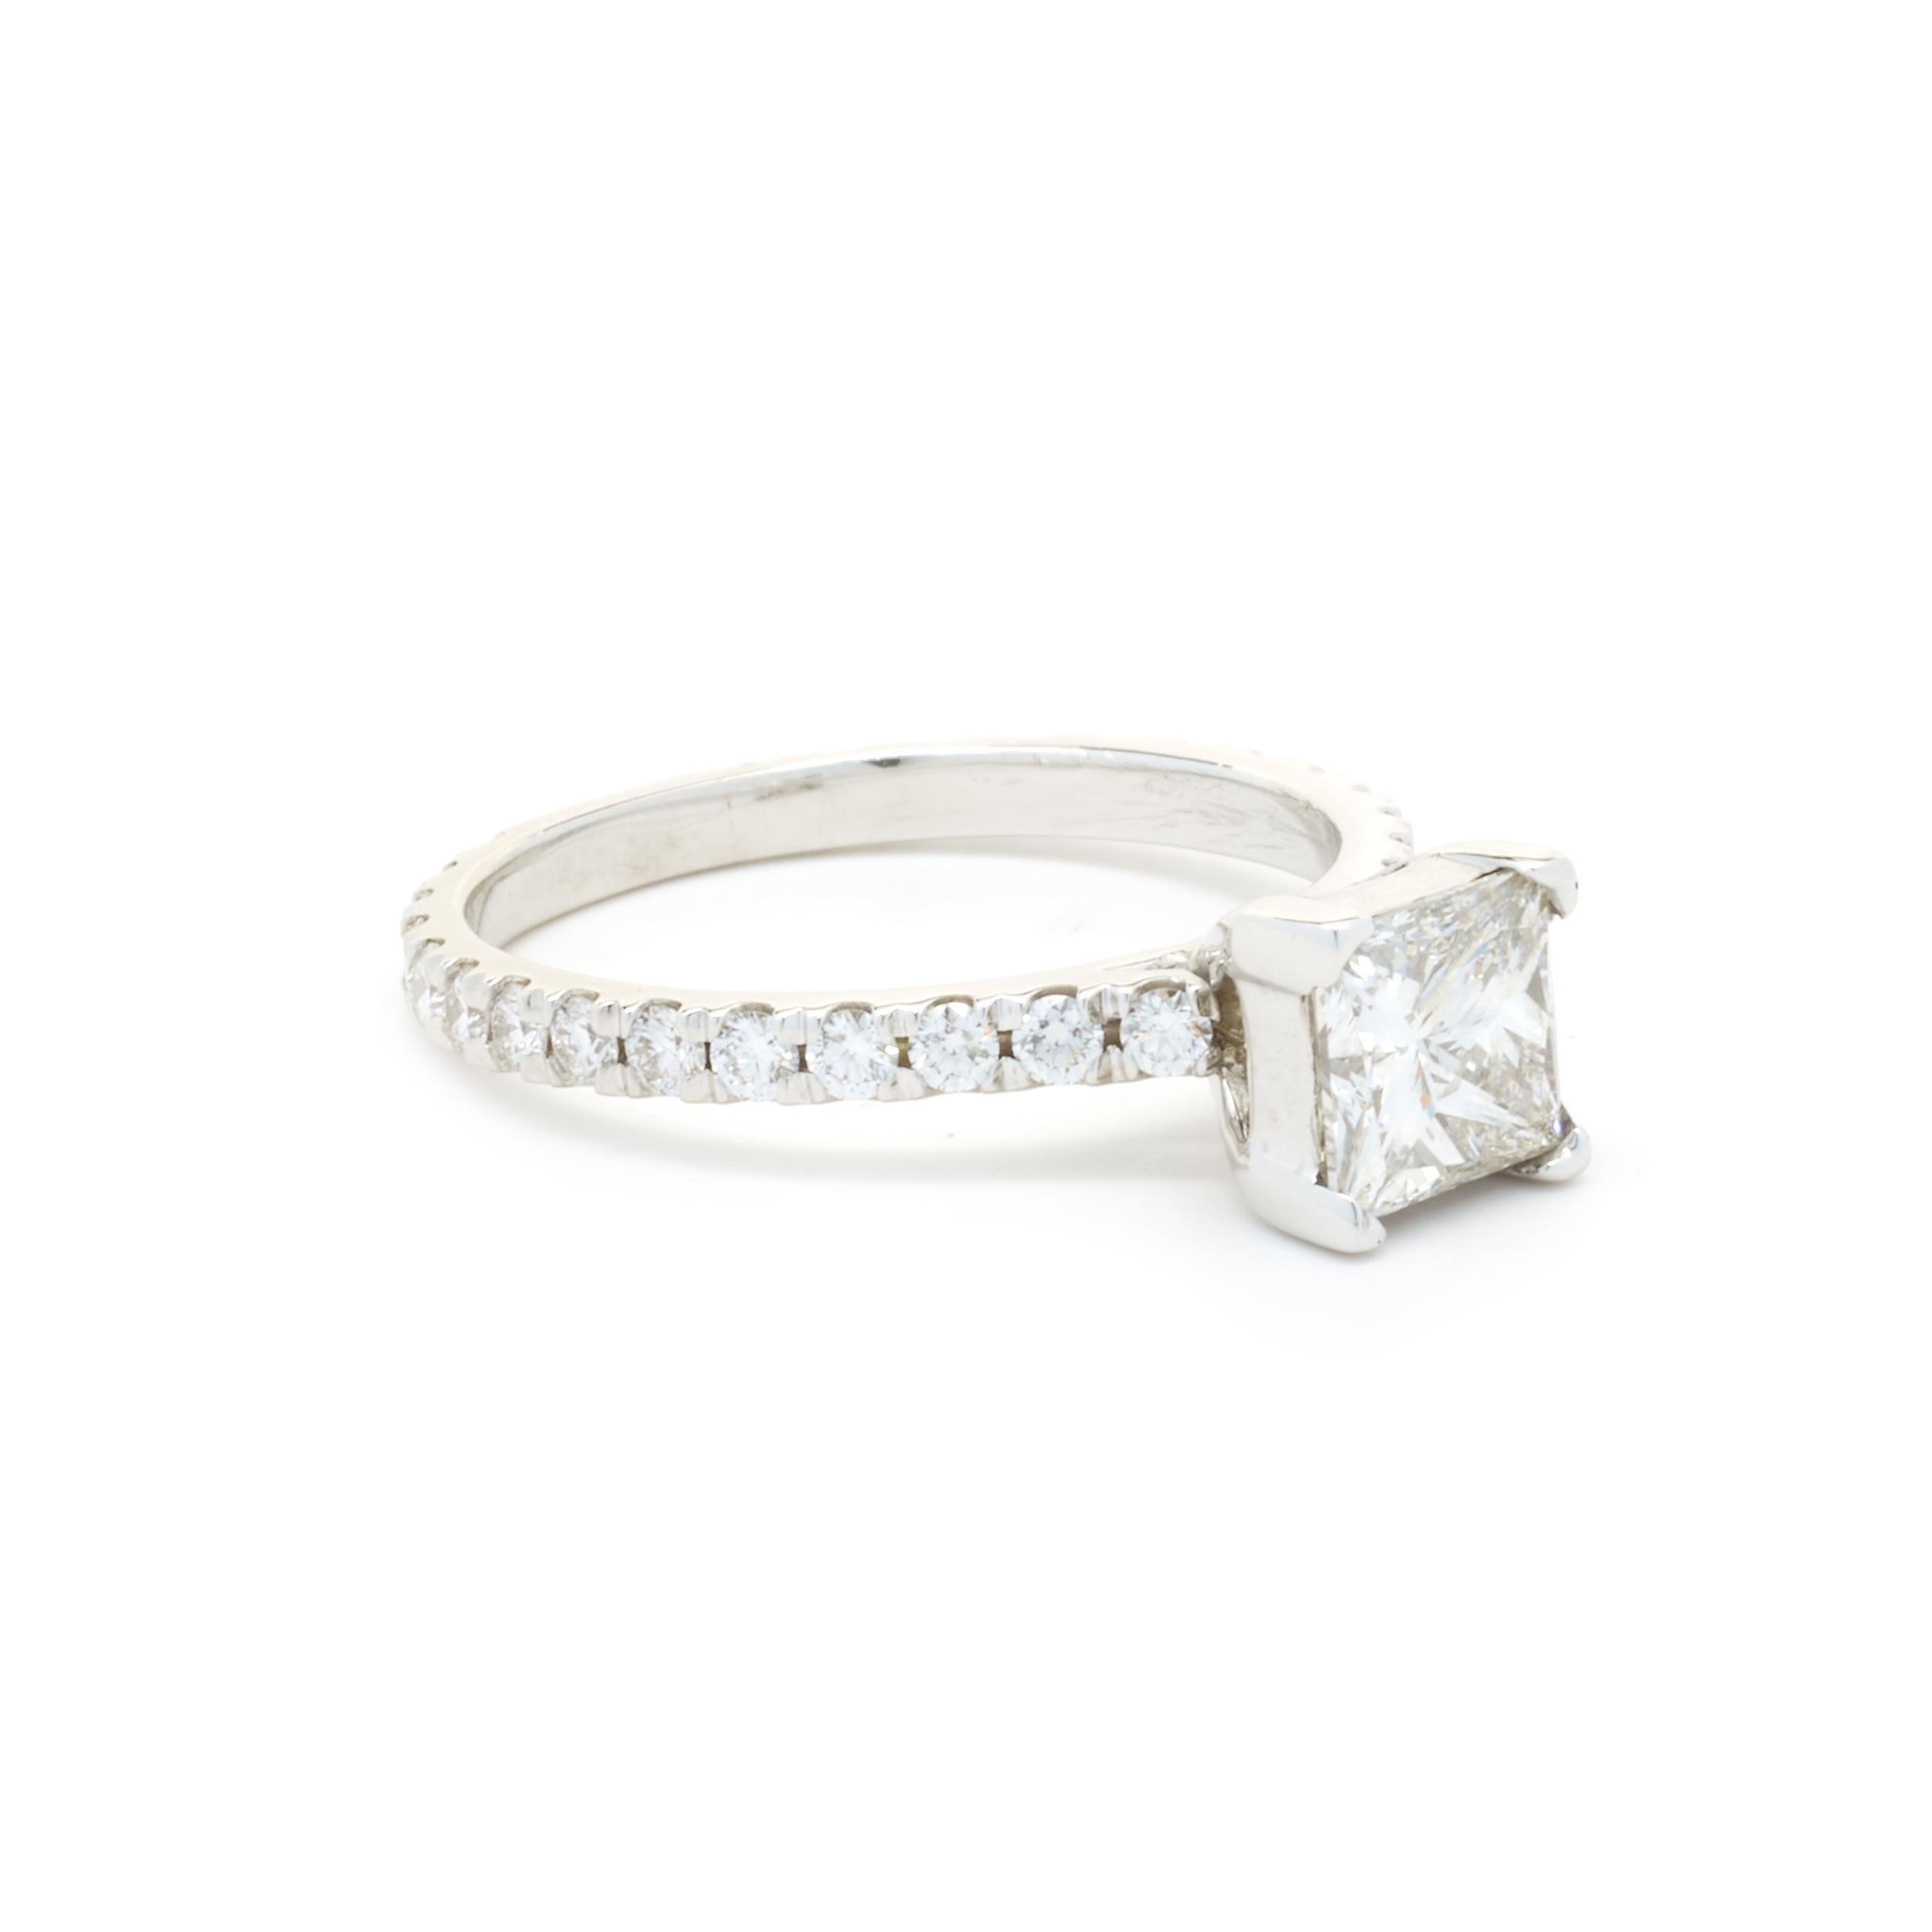 Designer: custom
Material: 14K white gold
Diamond: 1 princess cut = 1.25ct 
Color: H
Clarity: SI2
Diamond: 28 round cut = .70cttw
Color: G
Clarity: SI1
Ring Size: 7 (please allow up to 2 additional business days for sizing requests)
Dimensions: ring